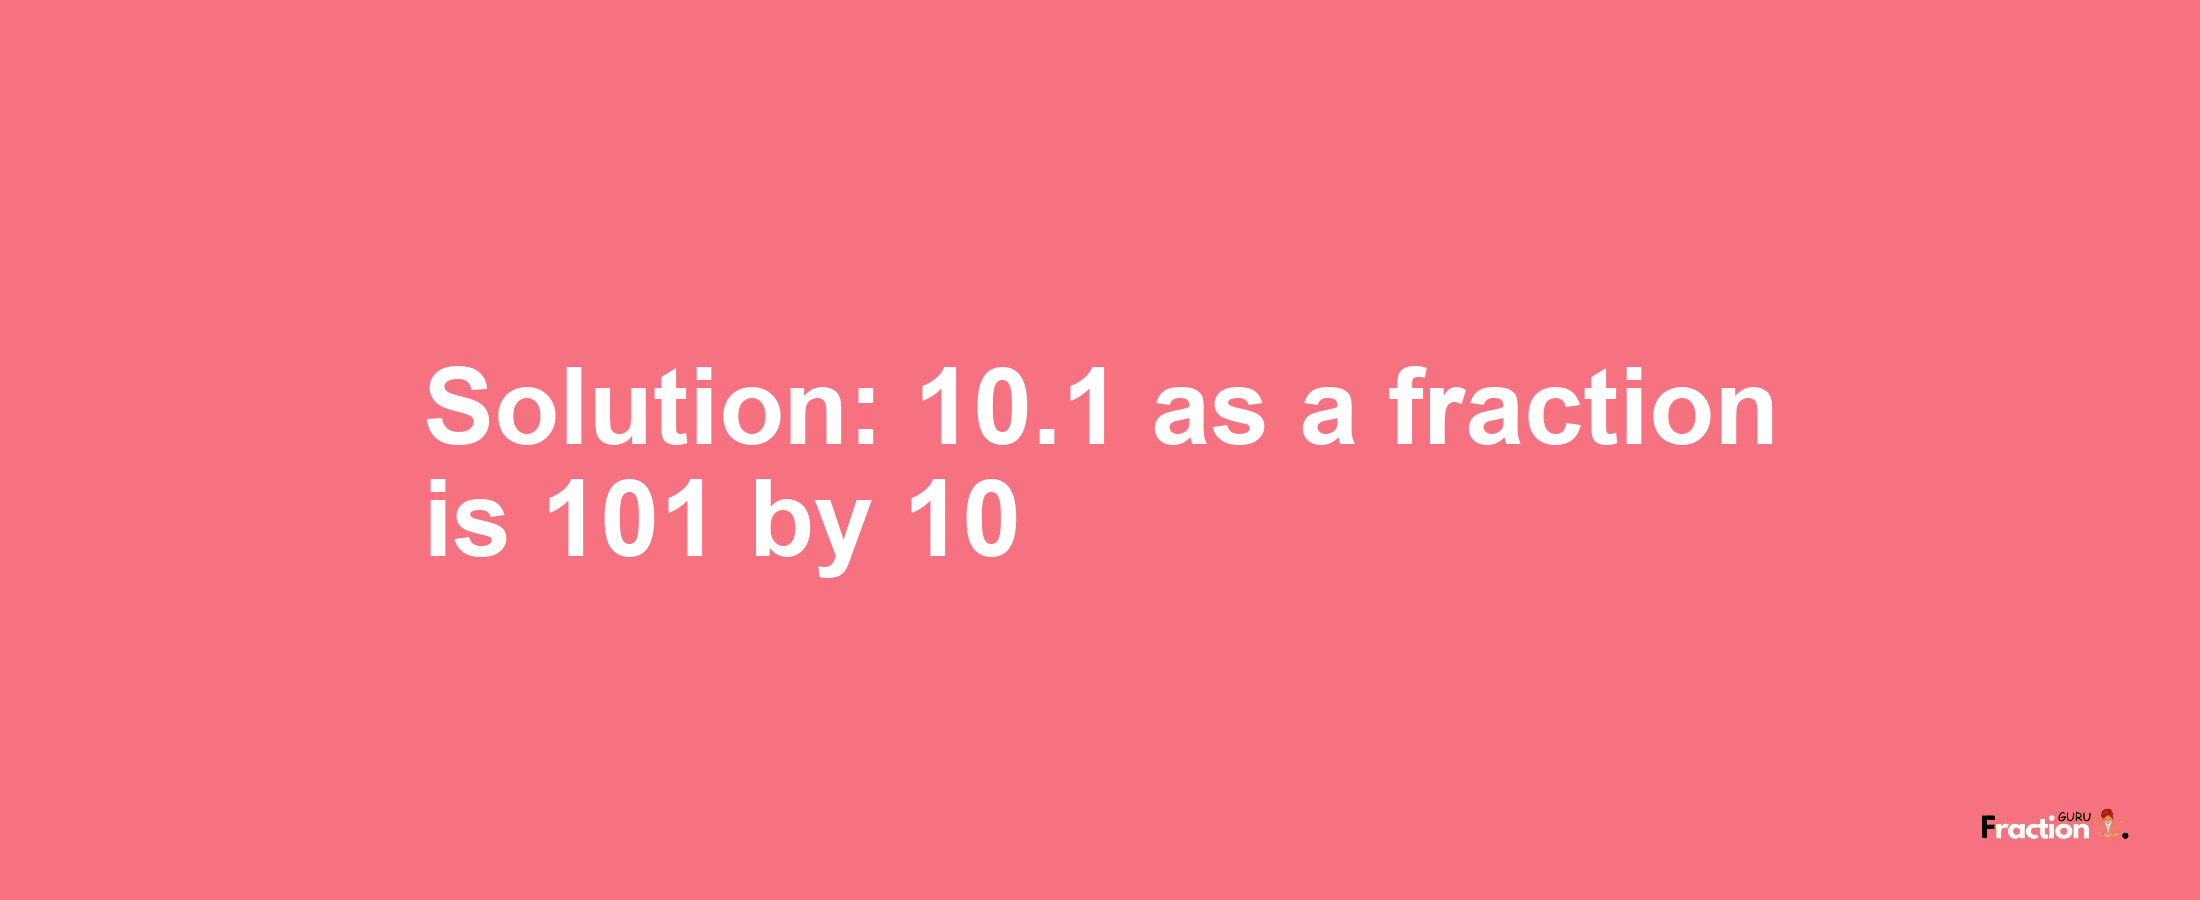 Solution:10.1 as a fraction is 101/10